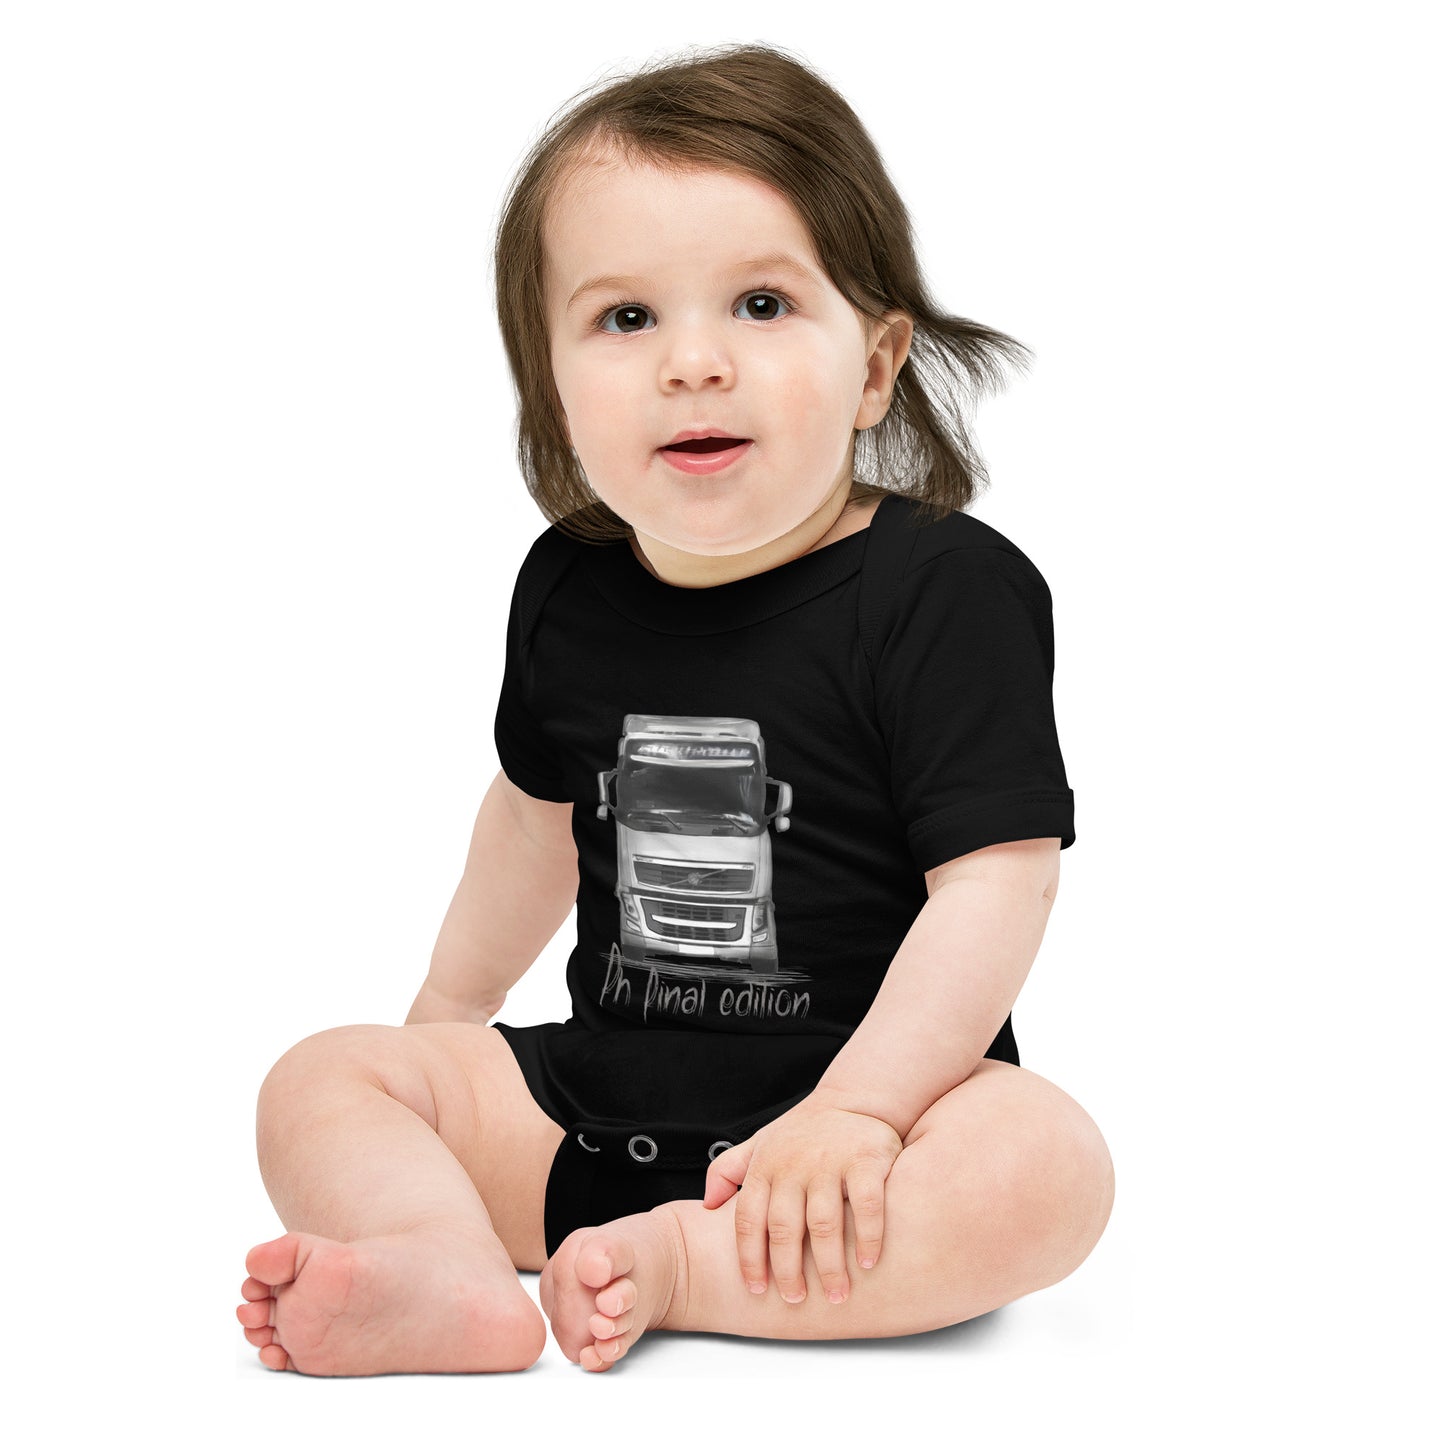 Baby short sleeve one piece − Volvo FH